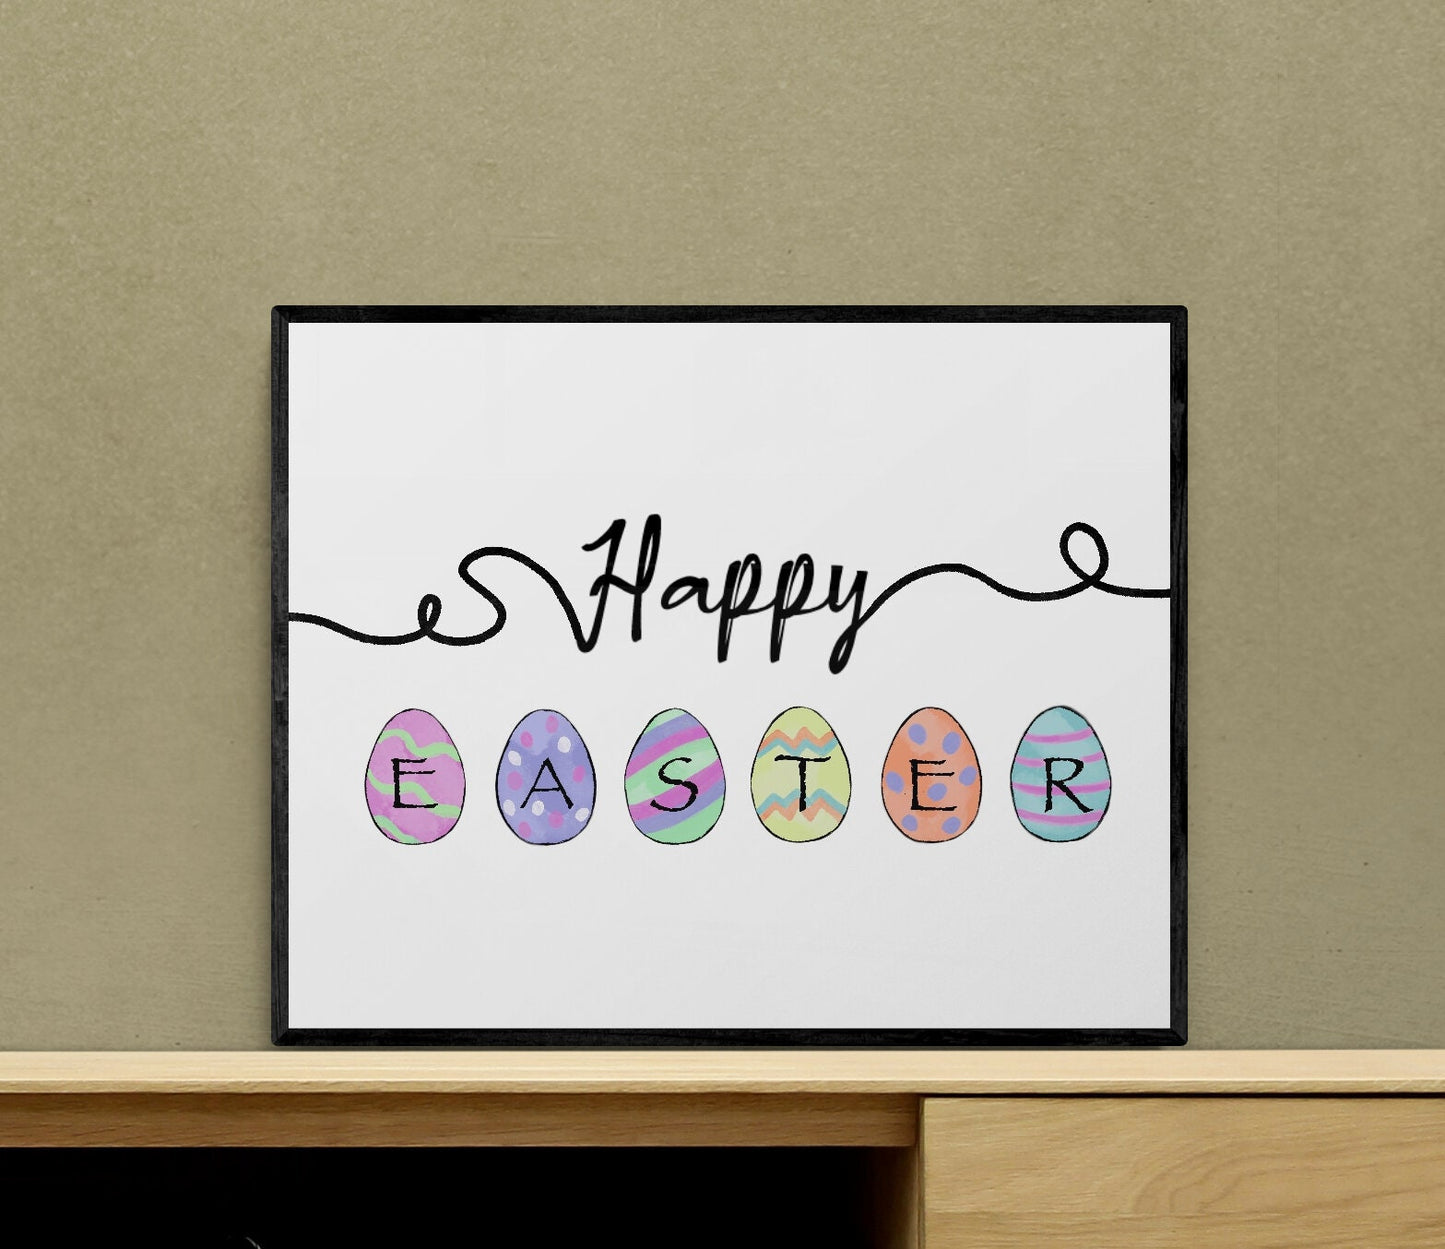 Easter Egg Print, Easter Home Decor, Happy Easter, Easter Wall Art, Holiday Decor, Easter Gift, Easter Bunny Wall Art, Easter Painting